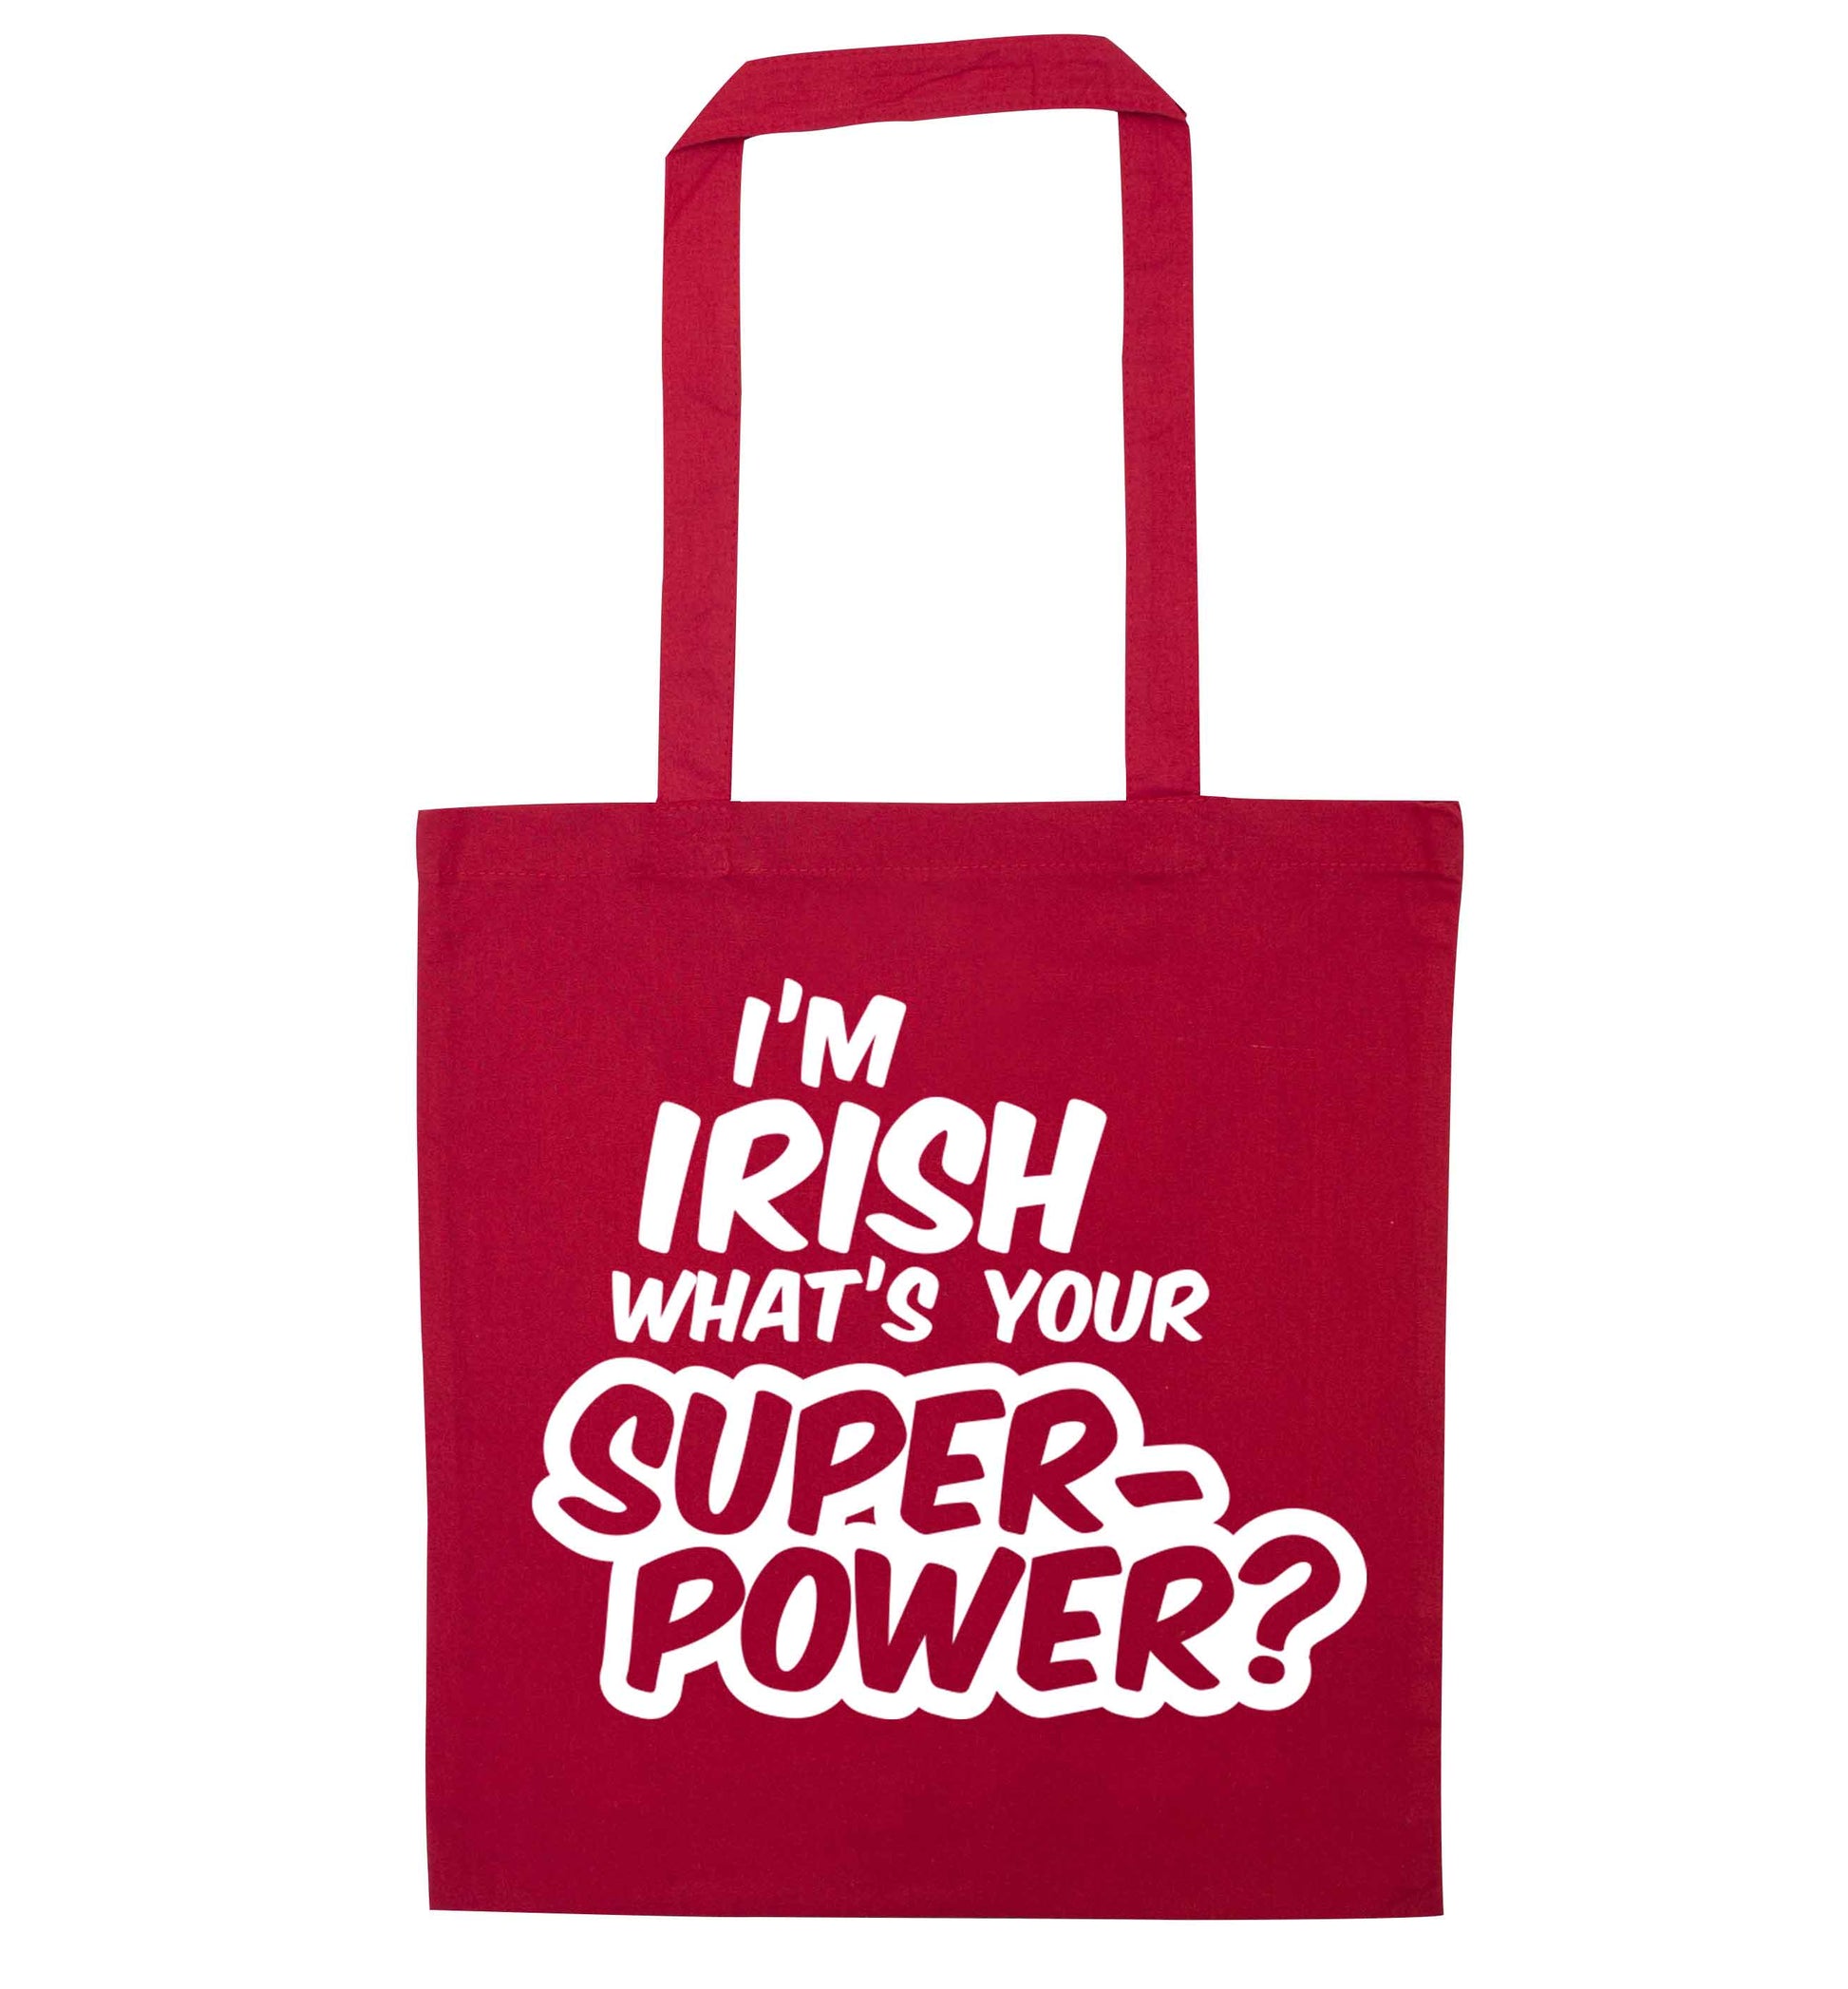 I'm Irish what's your superpower? red tote bag